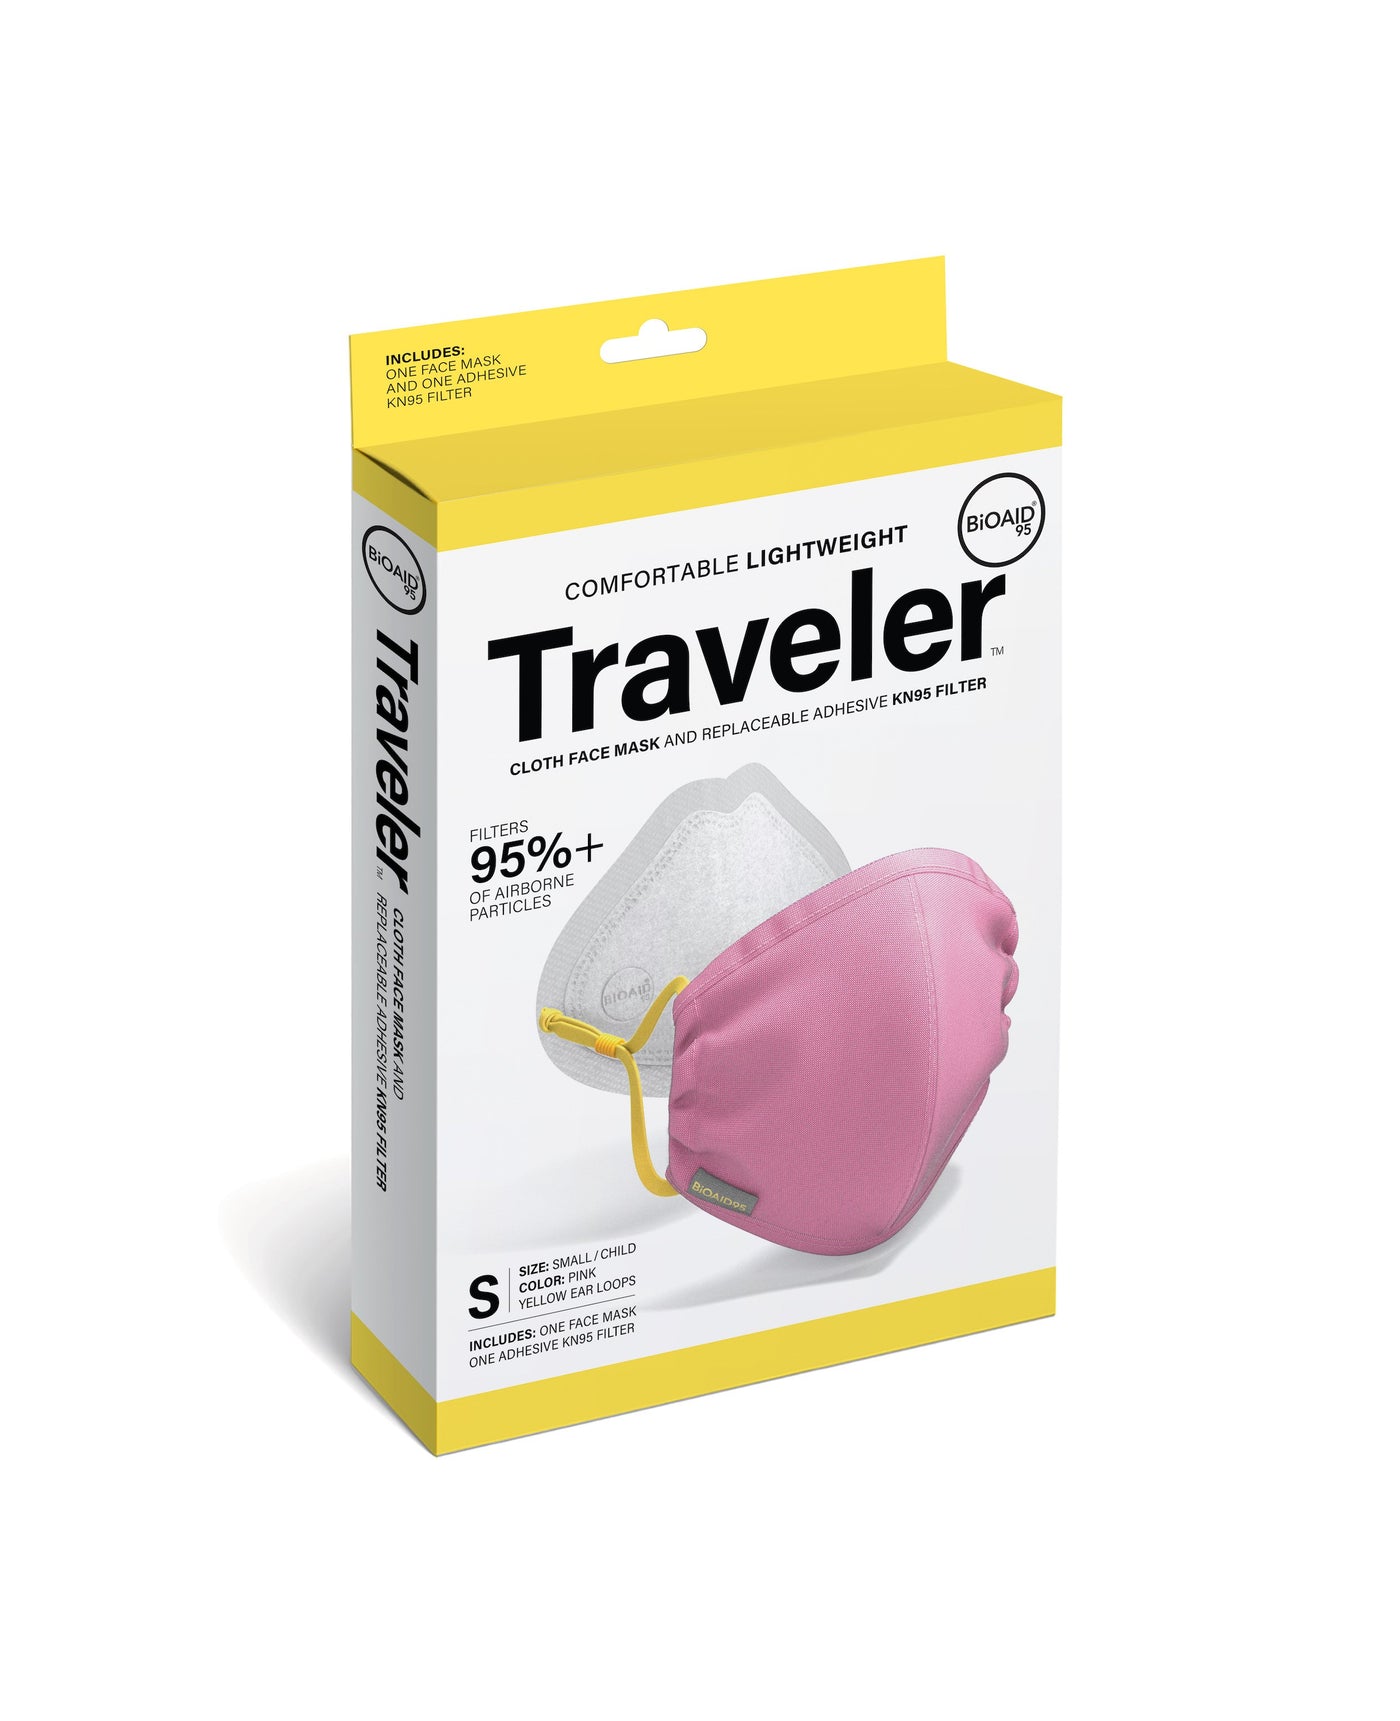 Traveler Mask + Replaceable Adhesive KN95 Filter - Small / Child